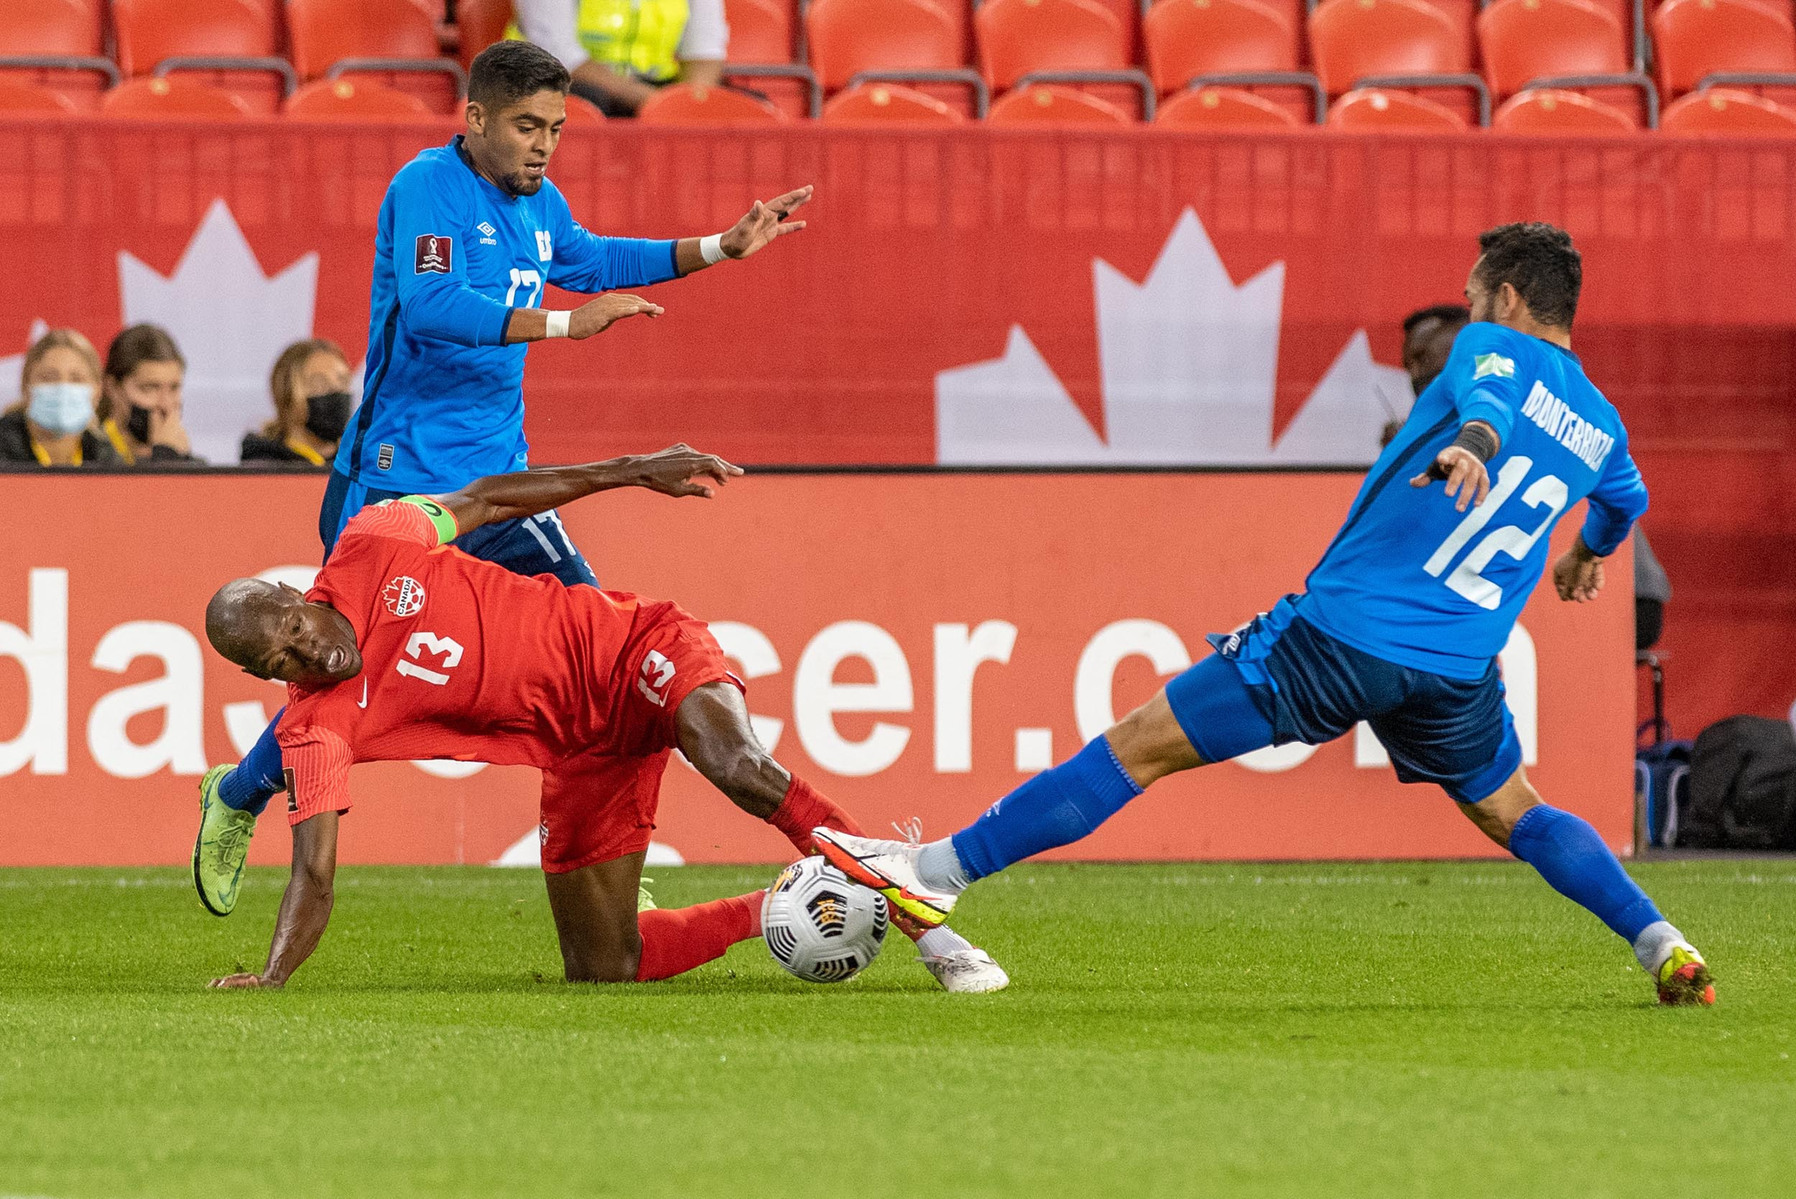 TORONTO, Ont. (08/09/21) - Canada's Atiba Hutchinson is photographed during a 3-0 victory against El Salvador at BMO Field in Toronto on Sept. 8, 2021. Photo by Alex Lupul
